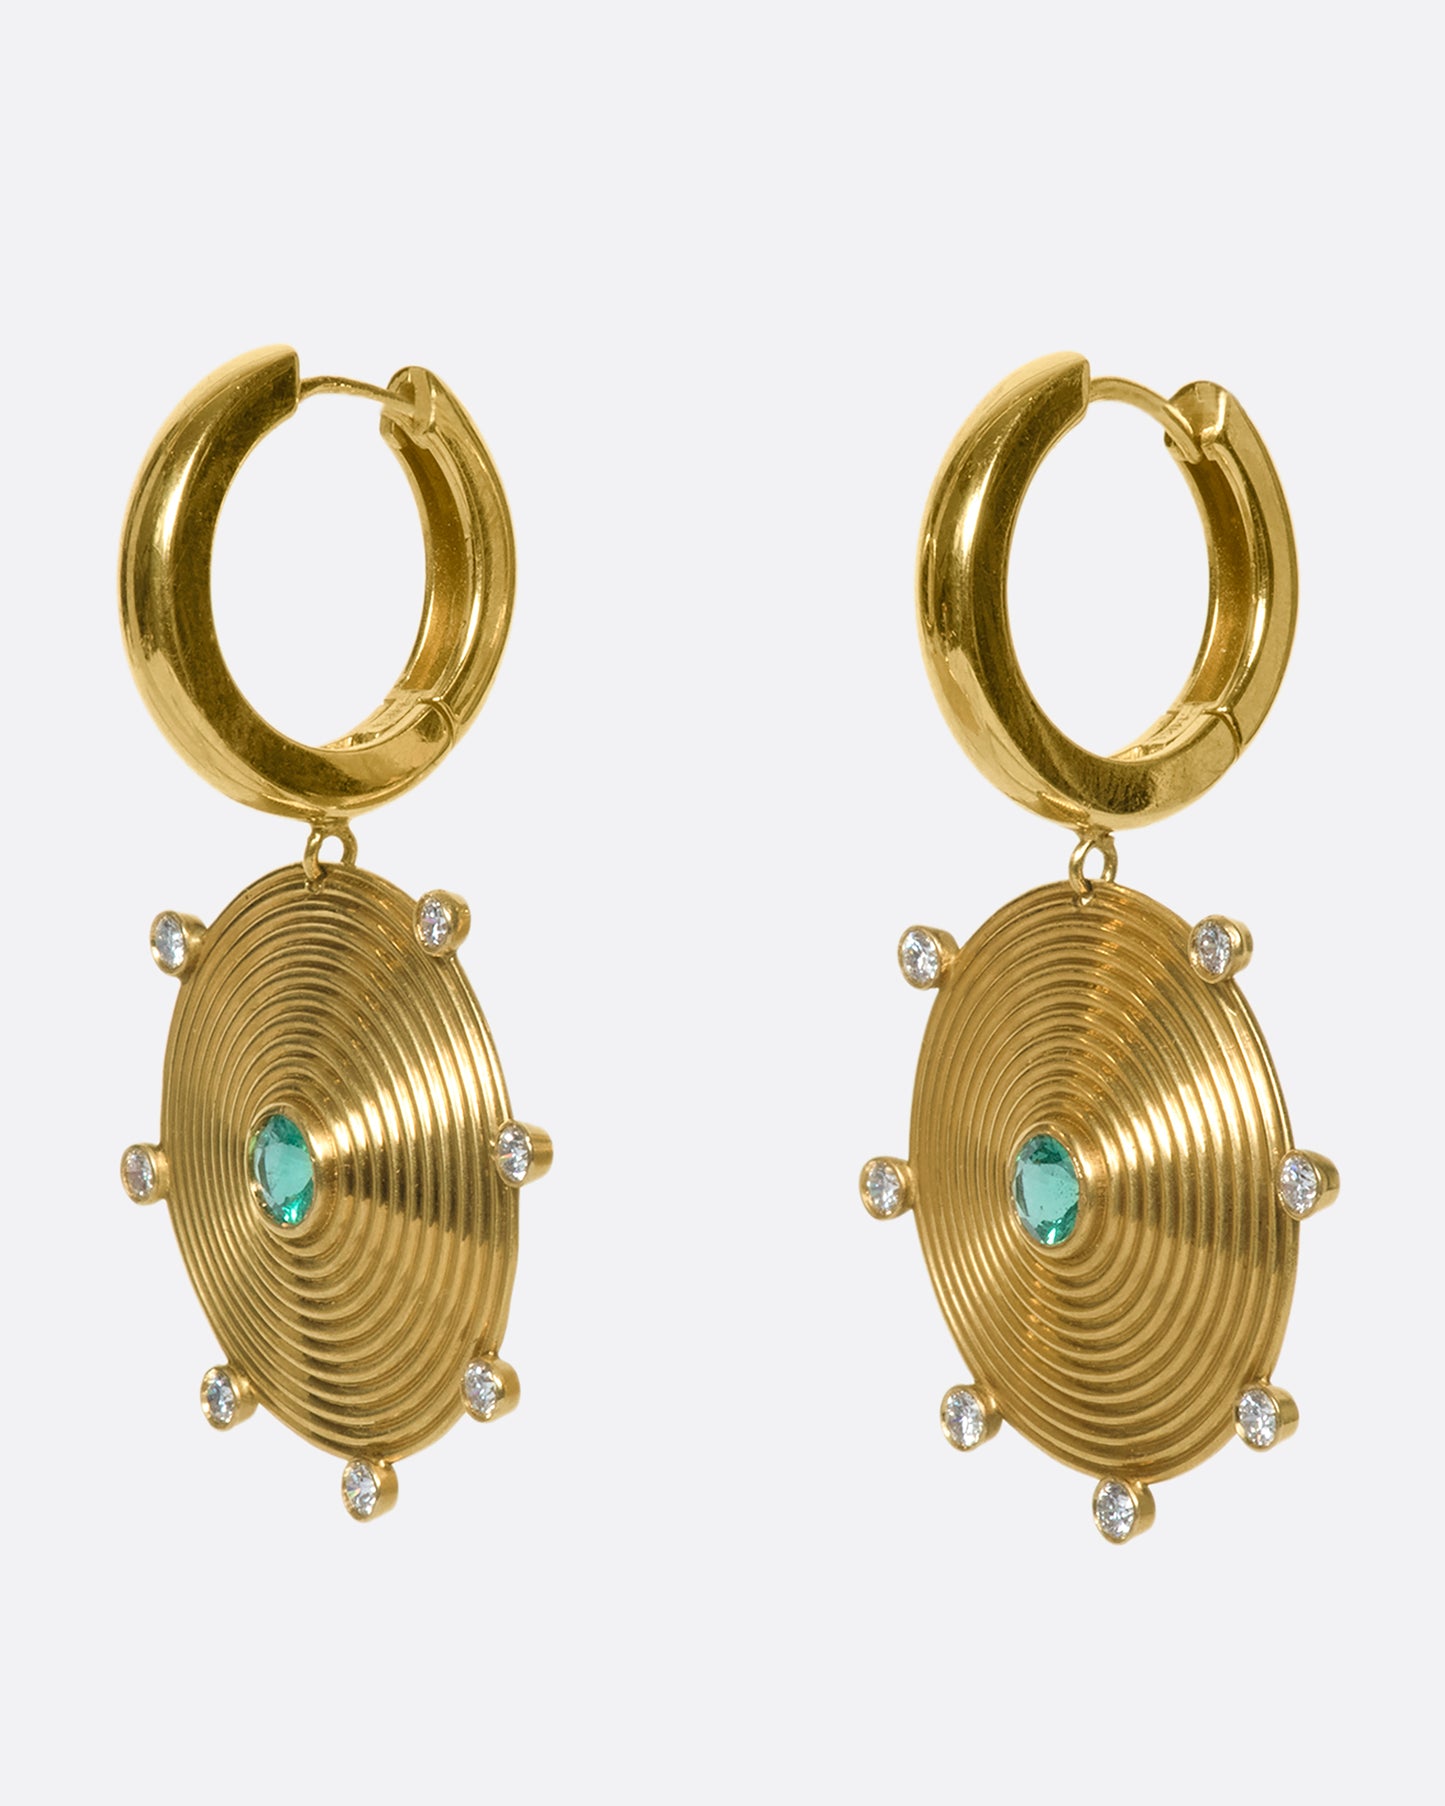 A pair of 14k gold hoops with gold disc drops, dotted with diamonds and emeralds. The discs' ribbed pattern constantly catches the light, giving the illusion of two glowing suns.